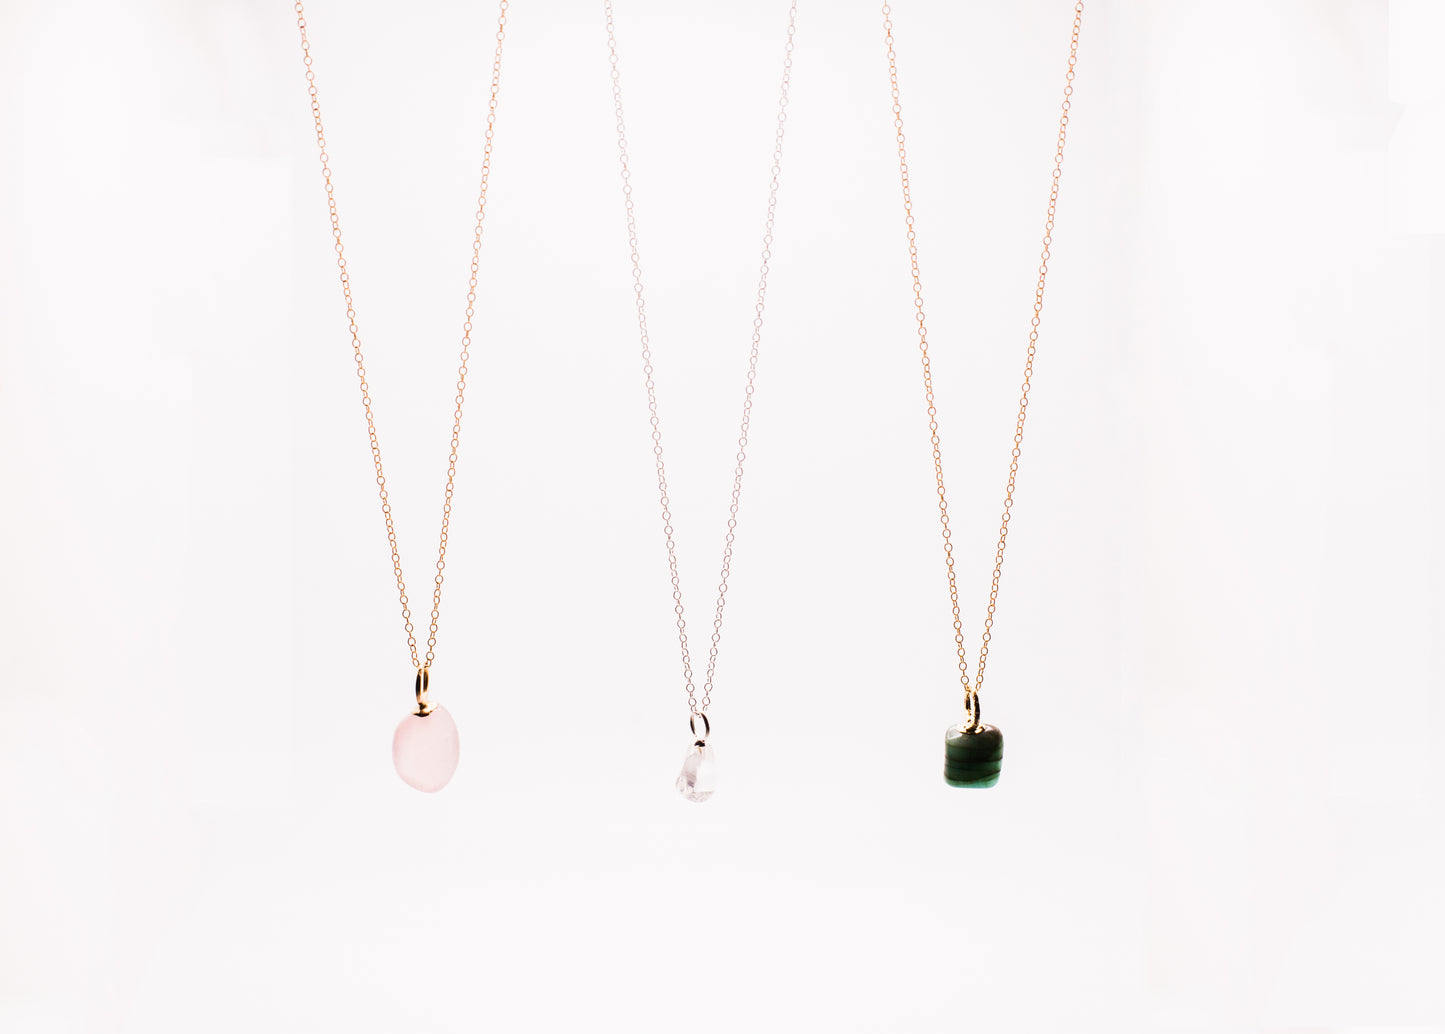 Crystal Beauty Necklaces